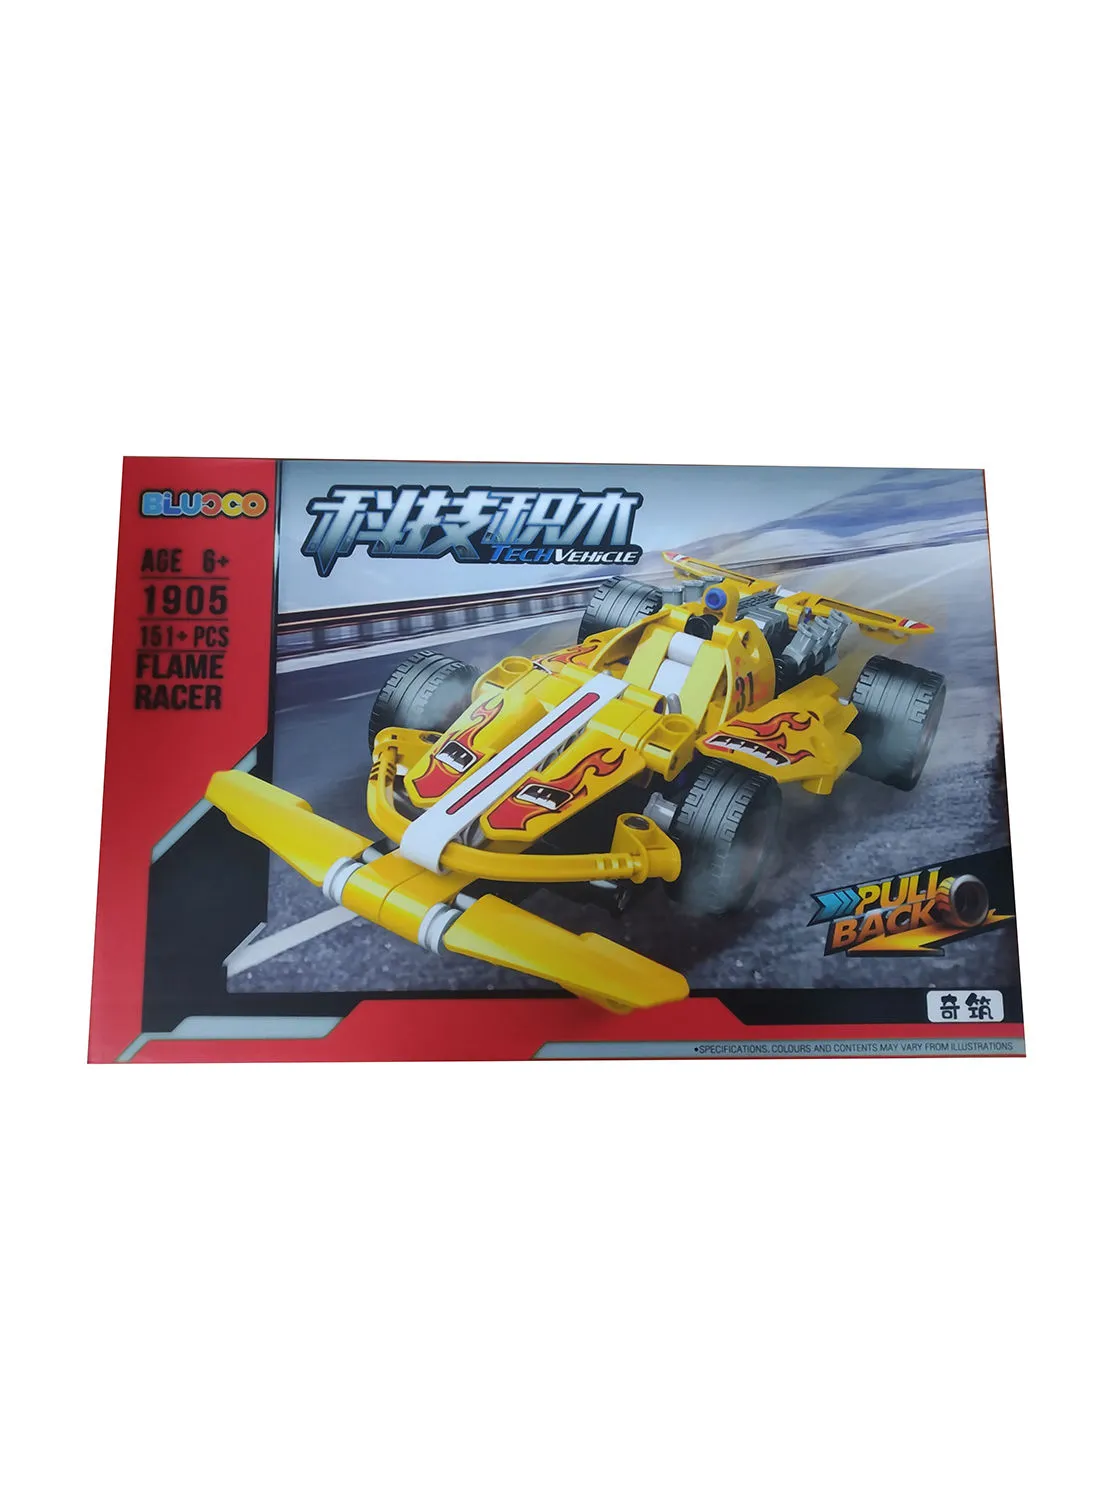 BLUCCO 148 + Pieces Flame Racer